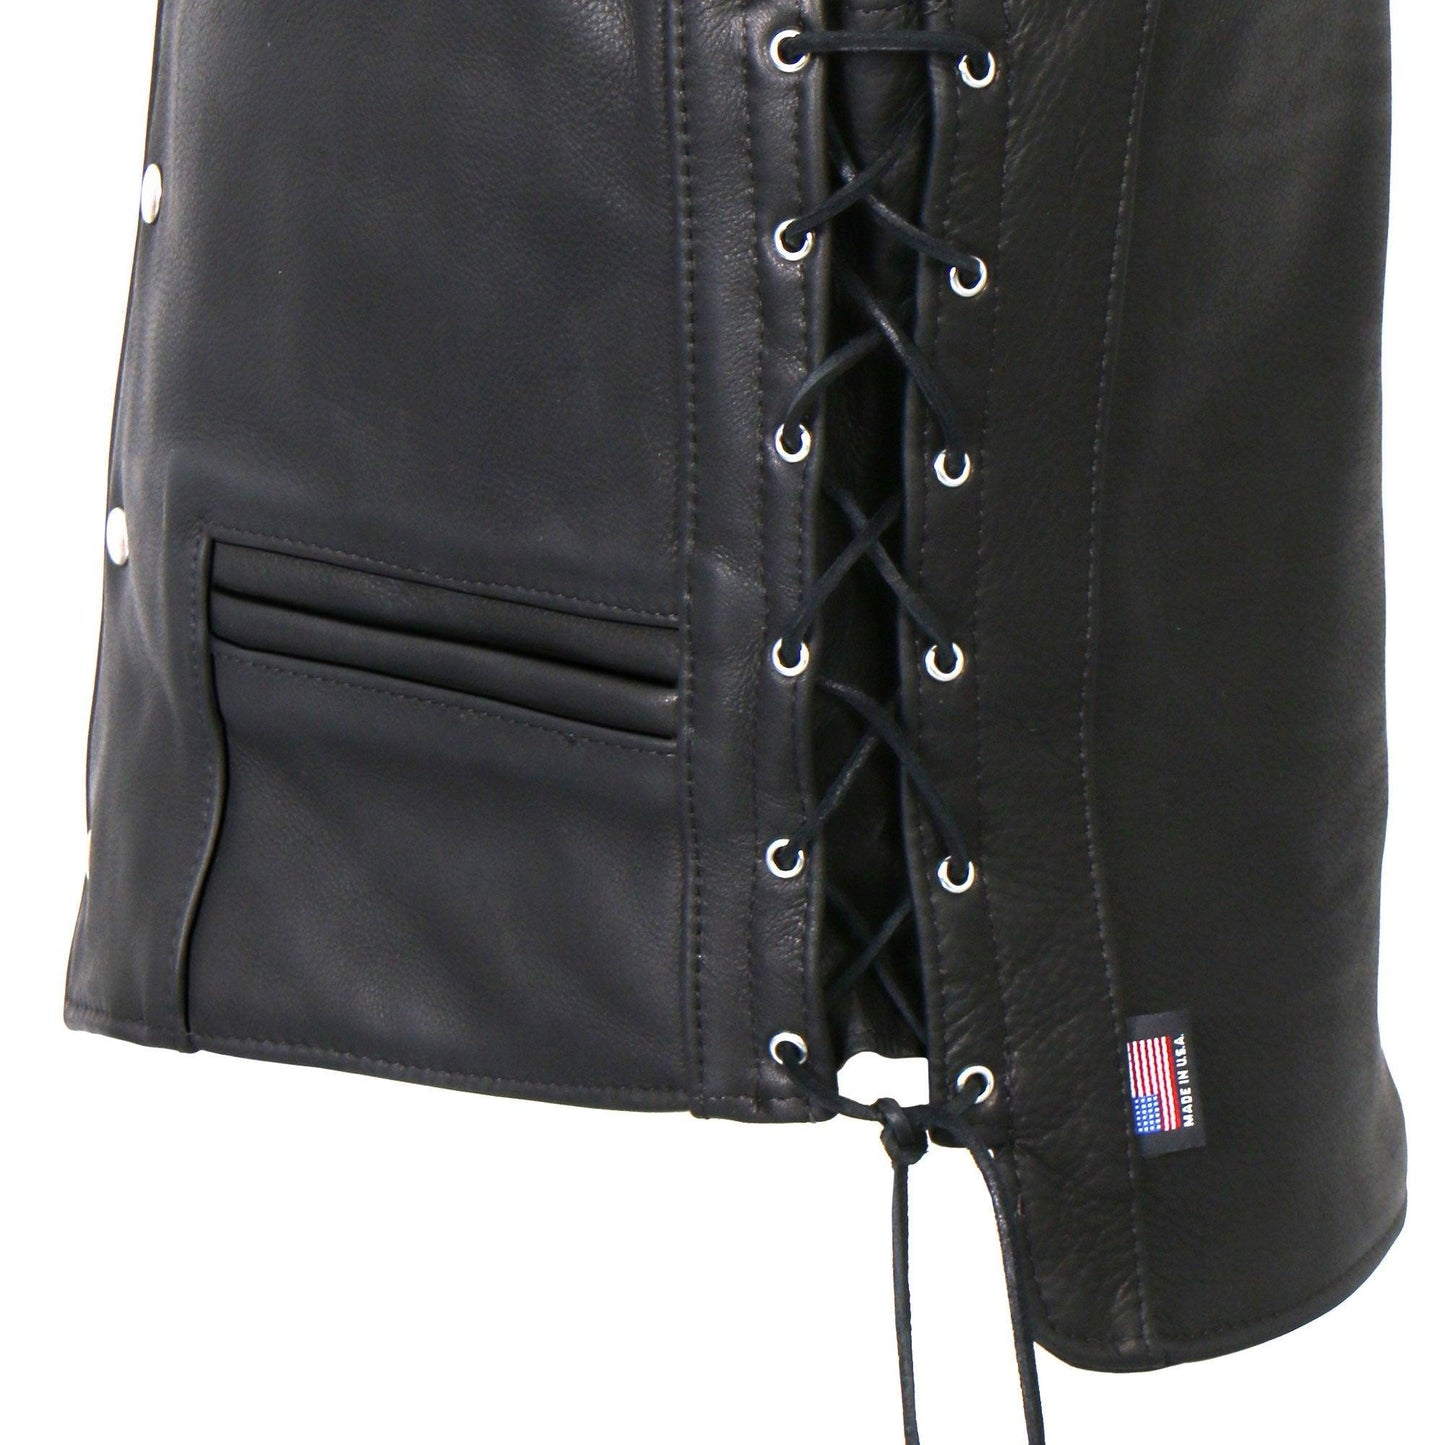 Hot Leathers Men's USA Made Extra Long Back Premium Heavyweight Steer hide Leather Vest - Military Republic